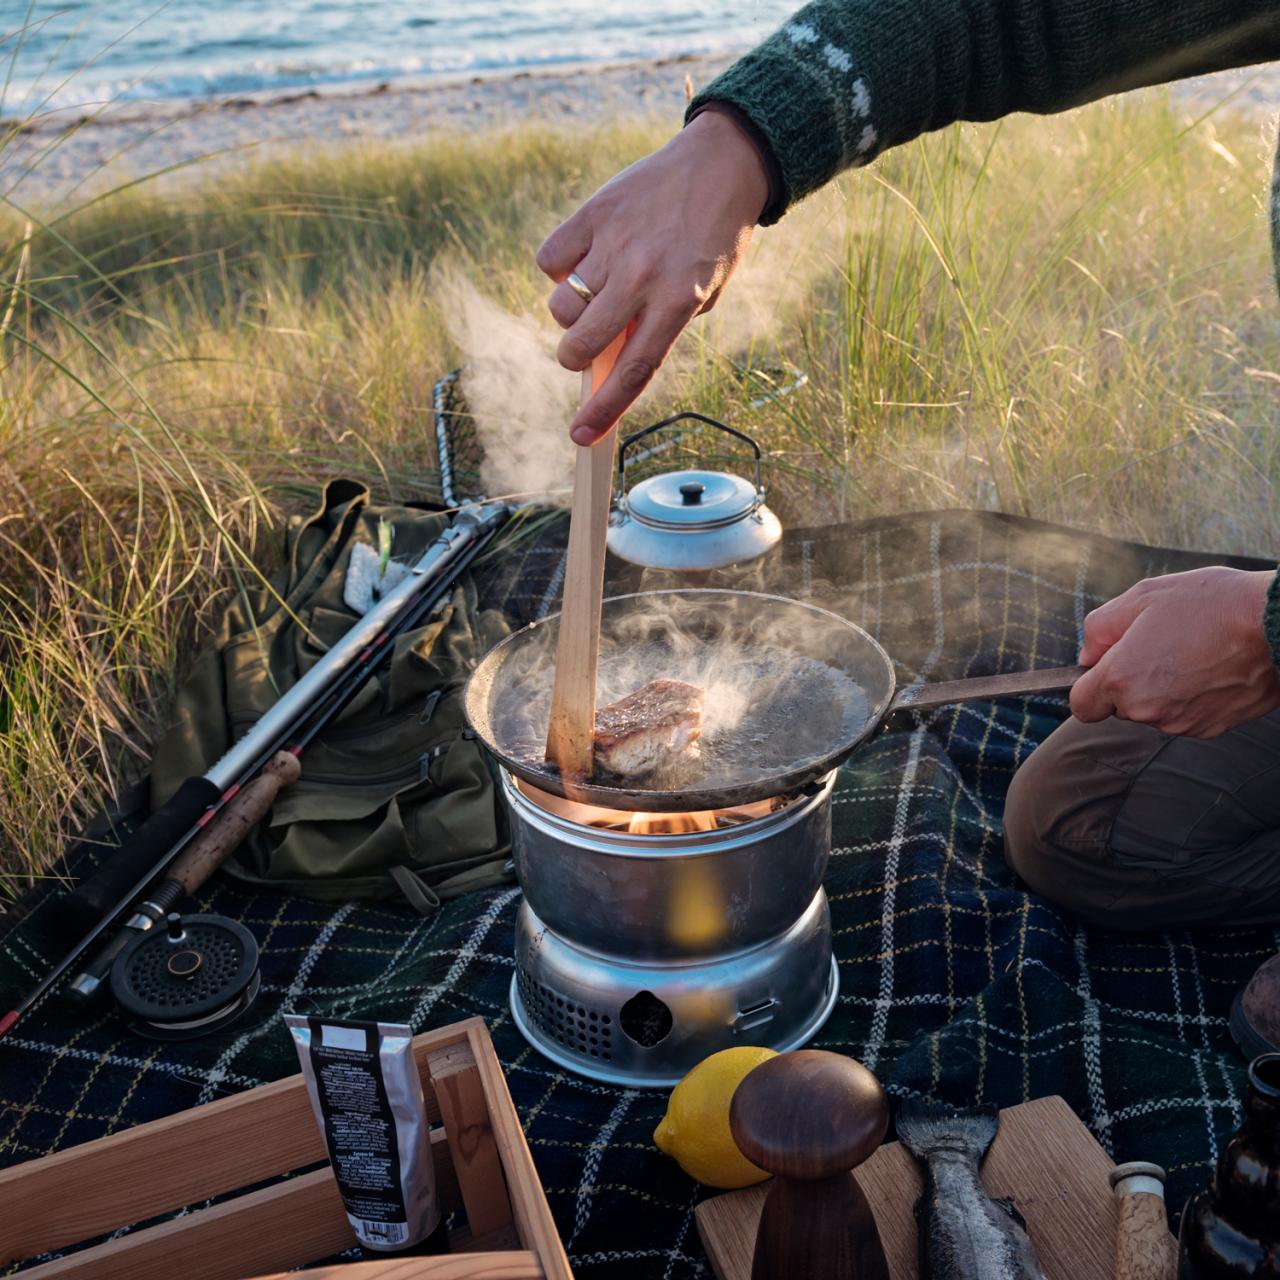 15 Best Camping Stoves for 2022 - Man Makes Fire